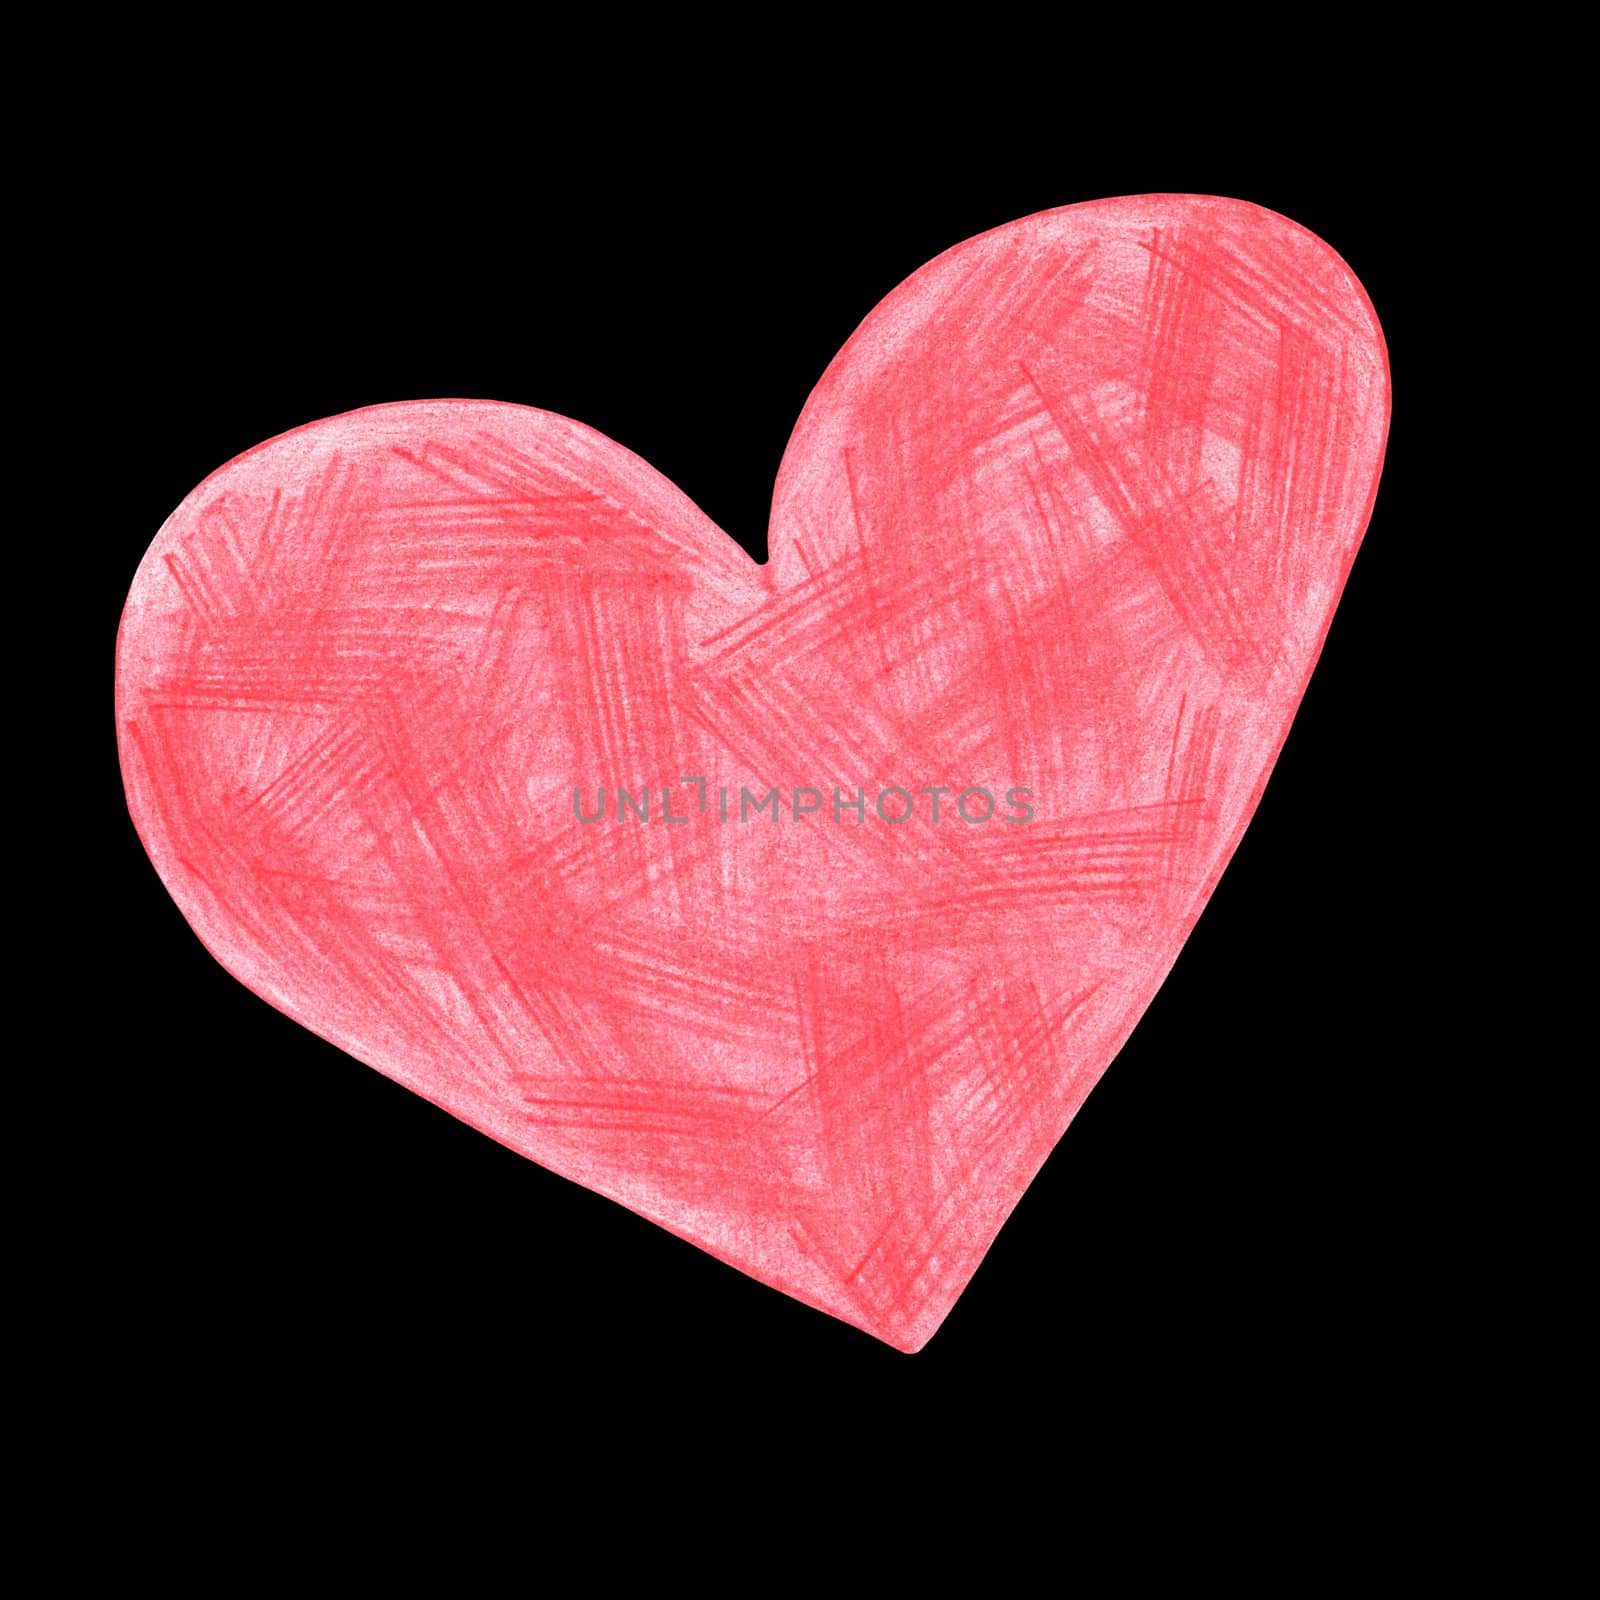 Red Heart Drawn by Colored Pencil. Heart Shape Isolated on Black Background. by Rina_Dozornaya